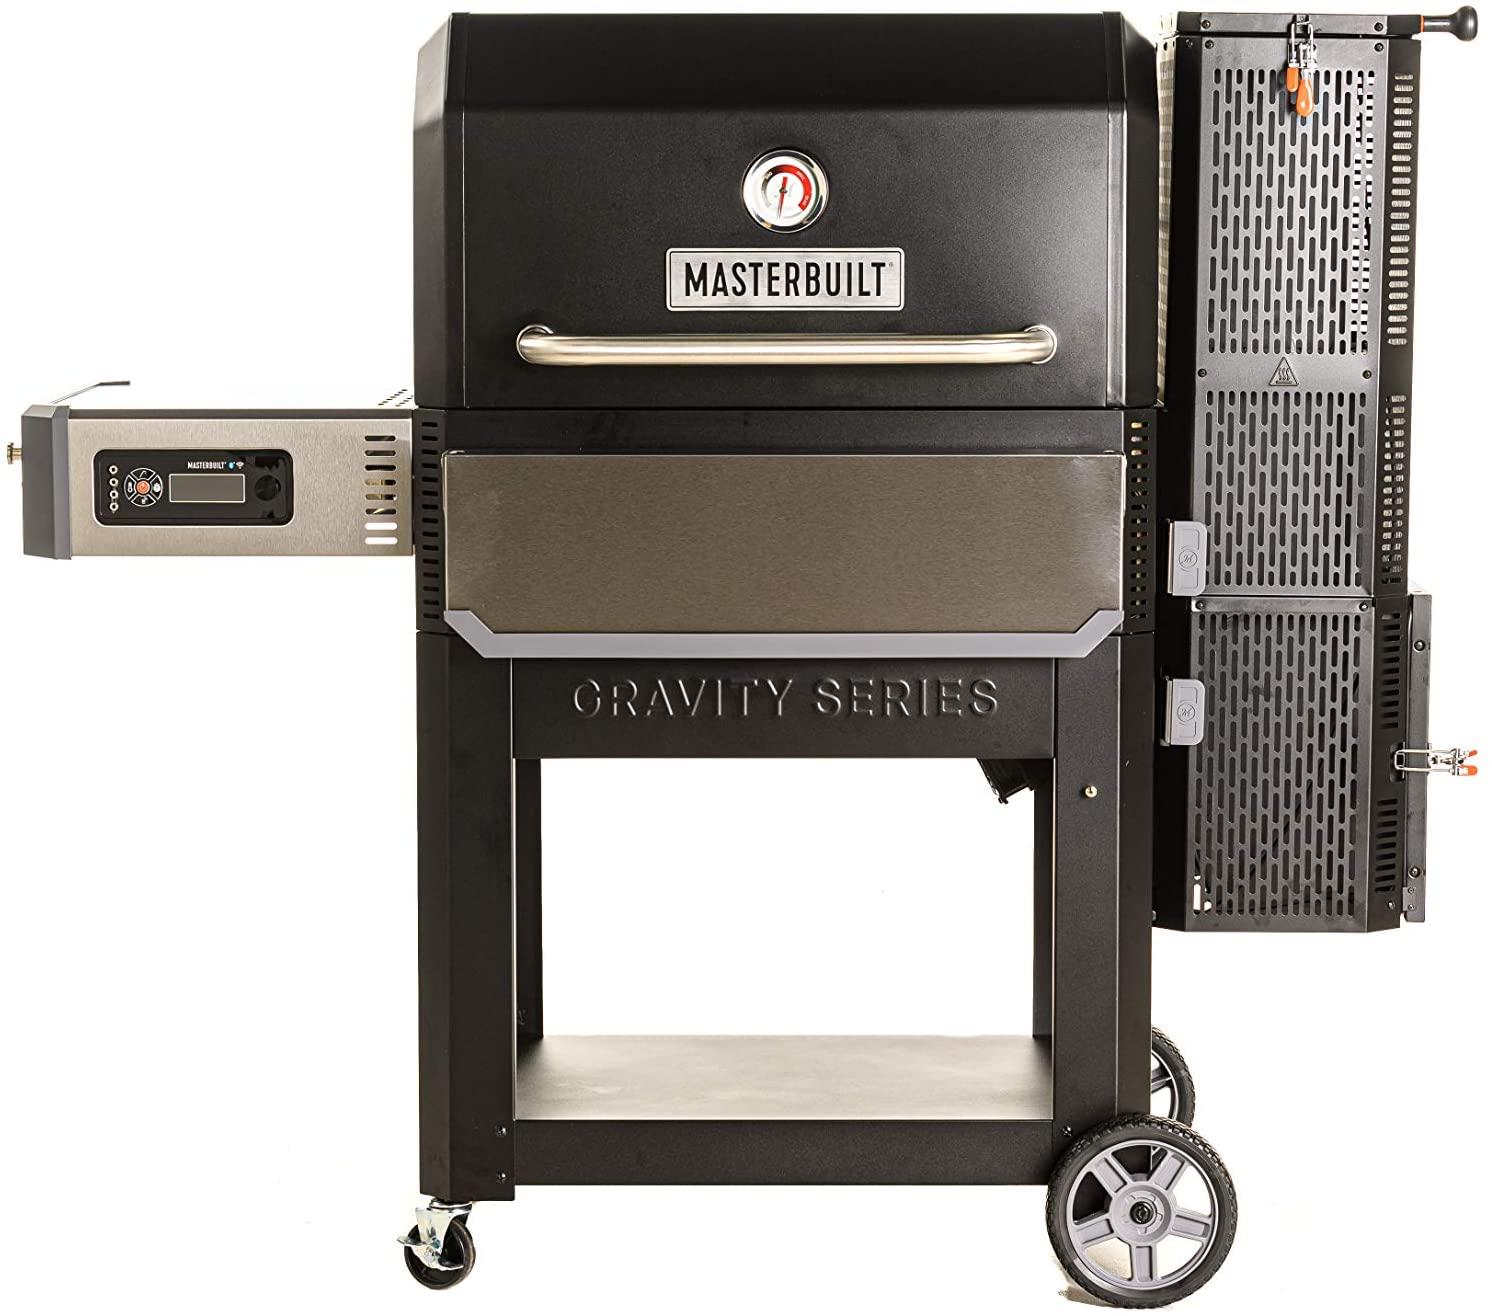 Masterbuilt Gravity Series 1050 XL Digital Charcoal Grill for $697 Shipped